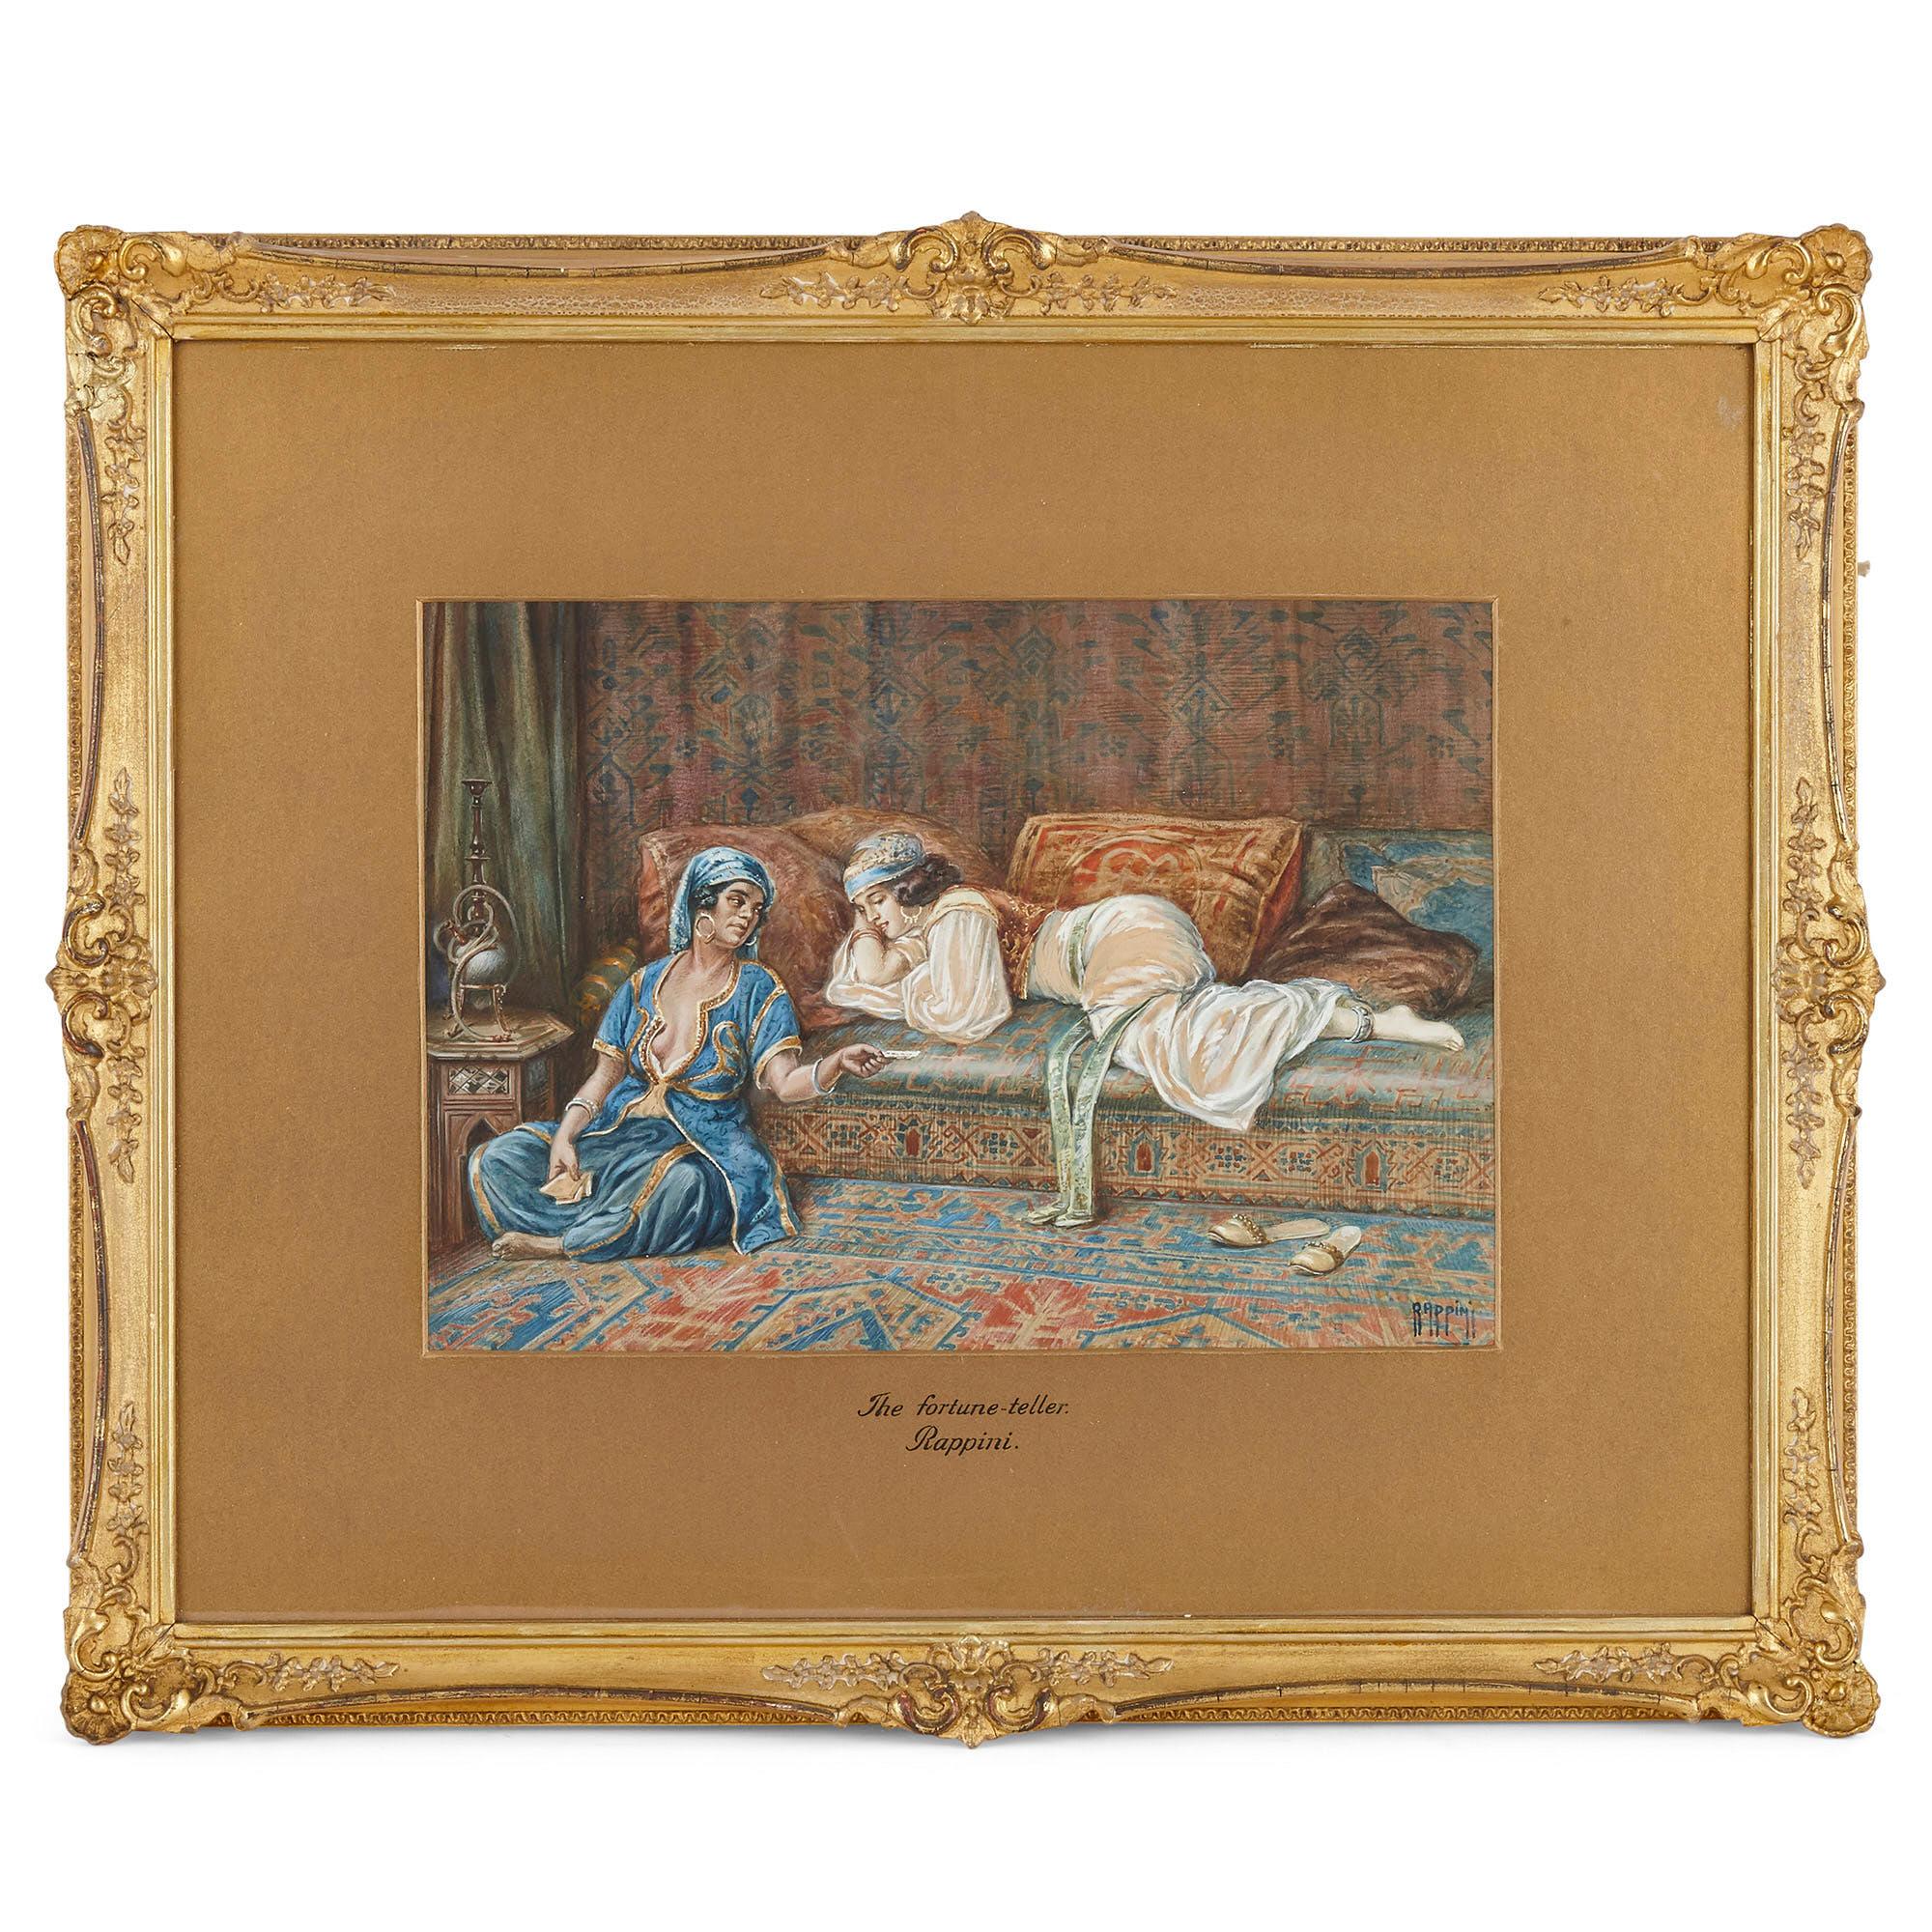 Pair of watercolours of harems by Vittorio Rappini
Italian, early 20th Century
Frame: 48cm, width 58cm, depth 3.5cm
Sheet: 24cm, width 34cm

This set of two watercolour paintings depicts scenes of women in the harem. The works, by the Italian artist